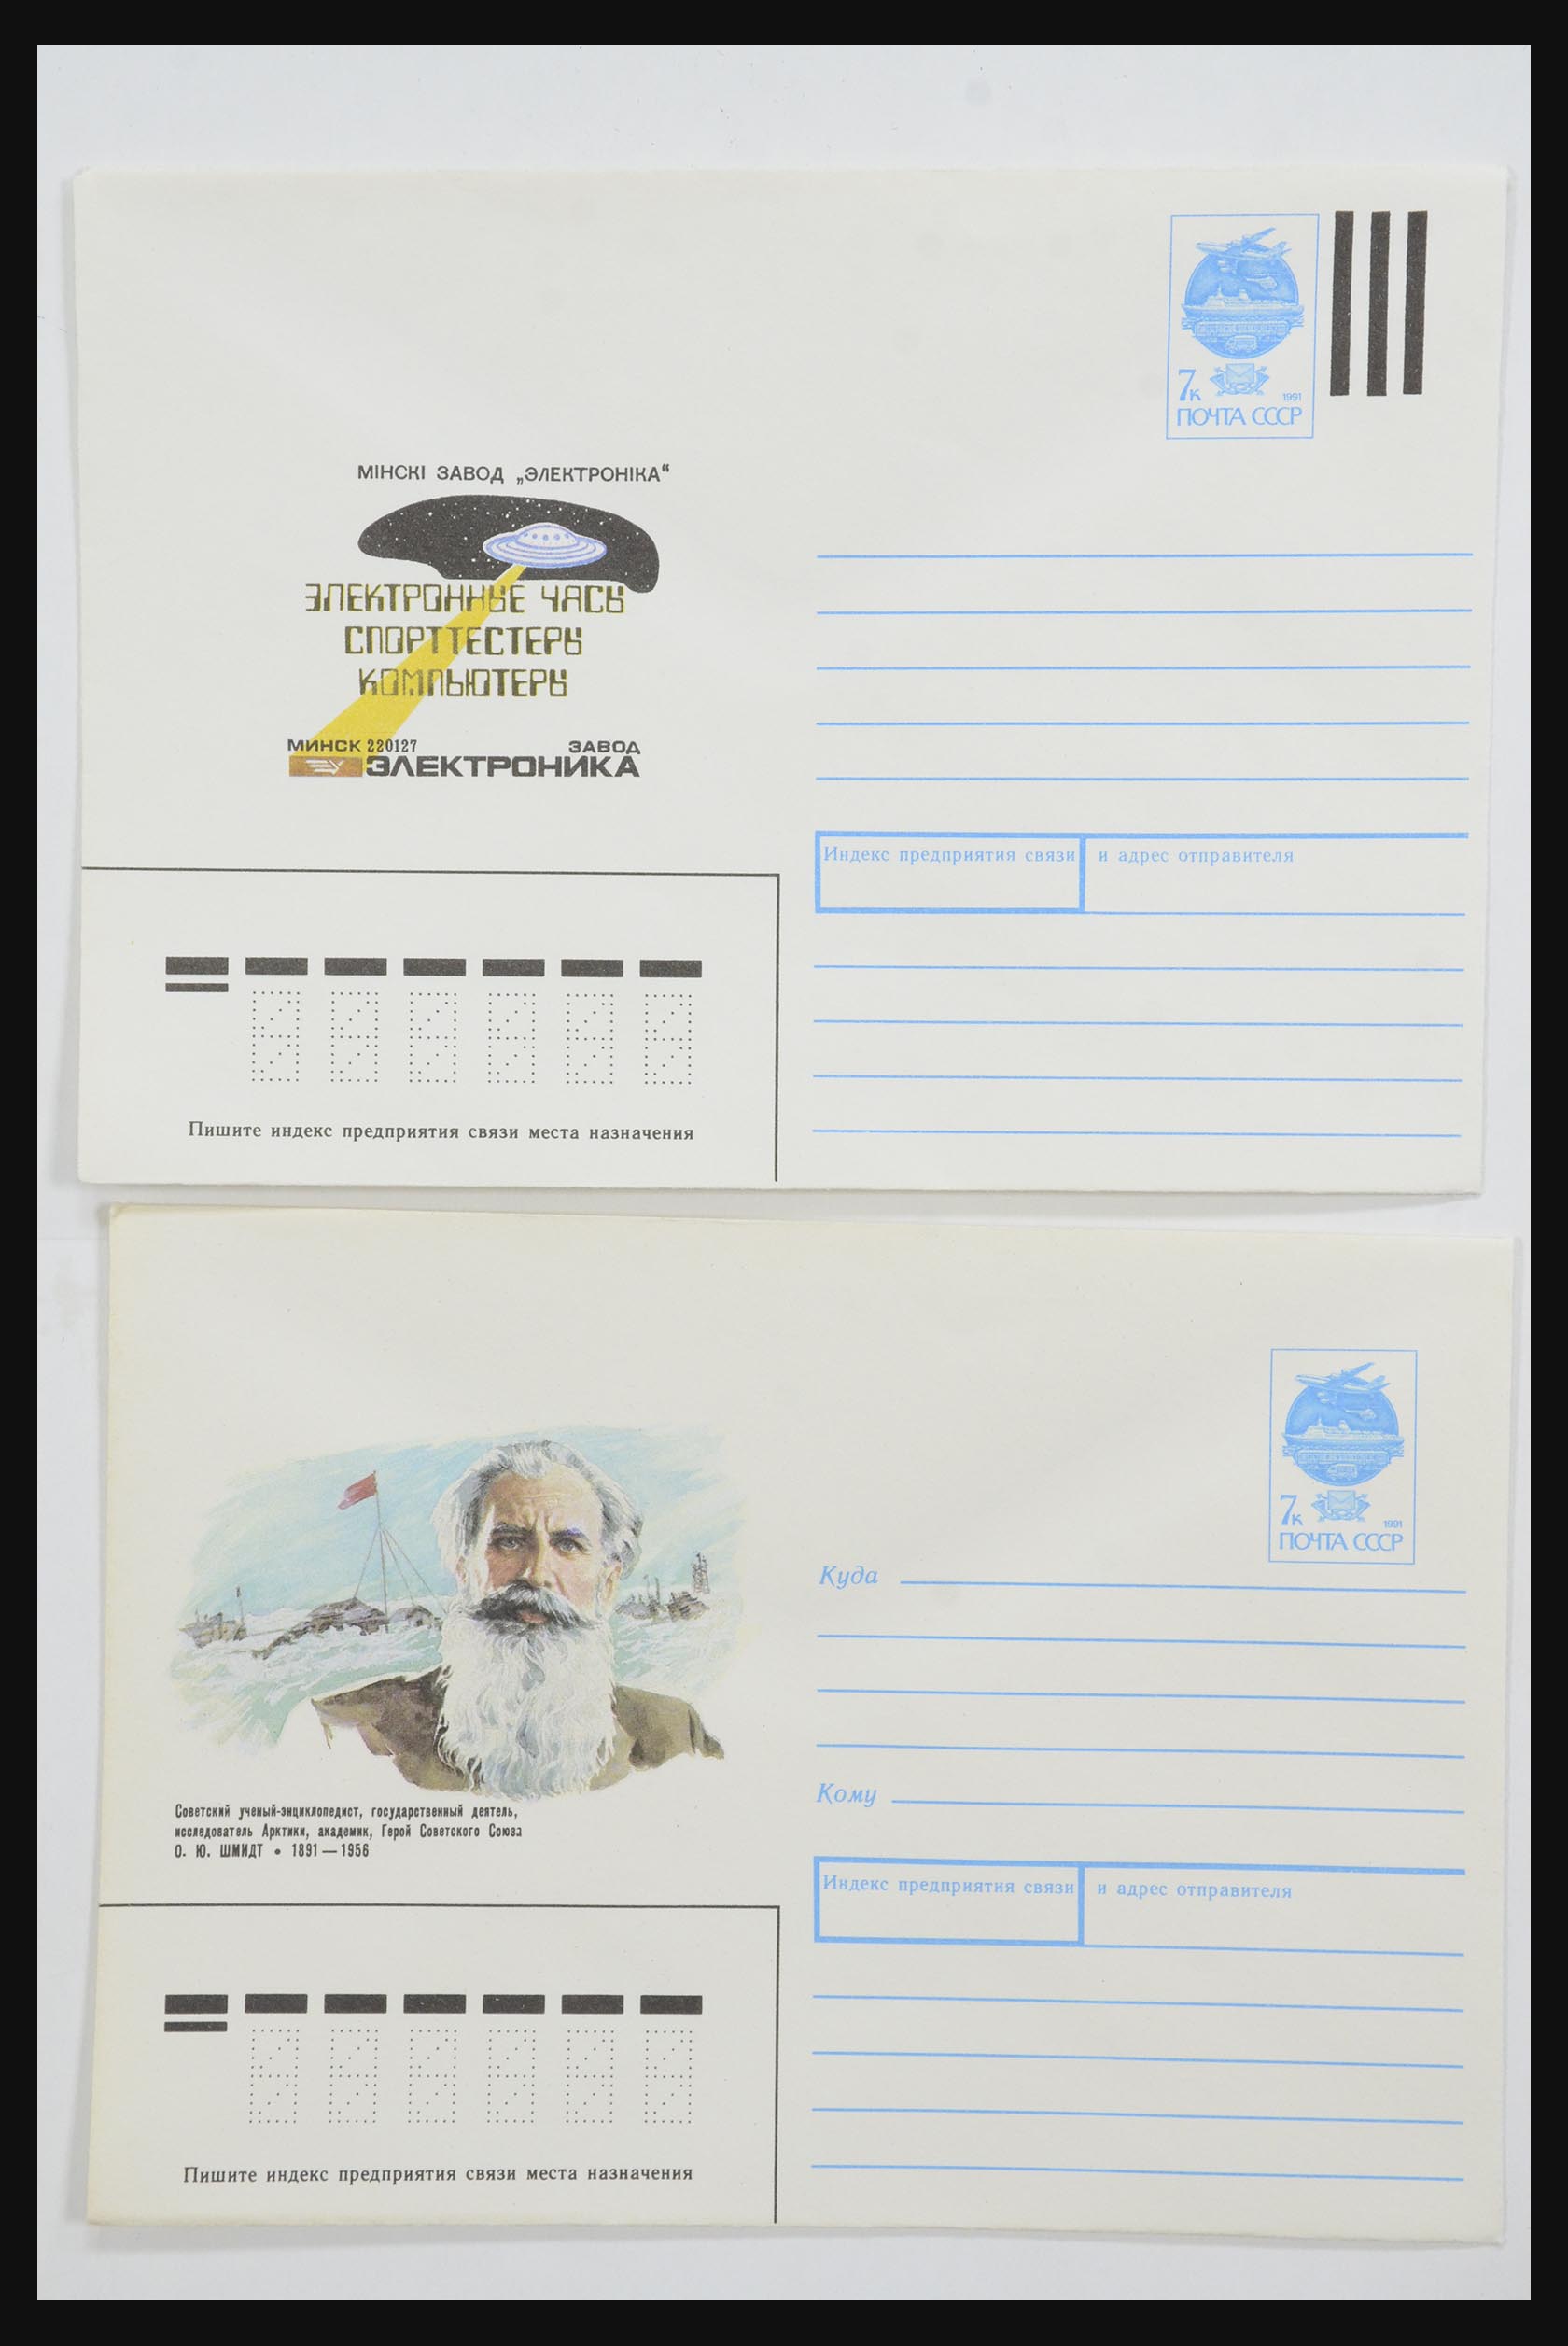 31928 0089 - 31928 Eastern Europe covers 1960's-1990's.